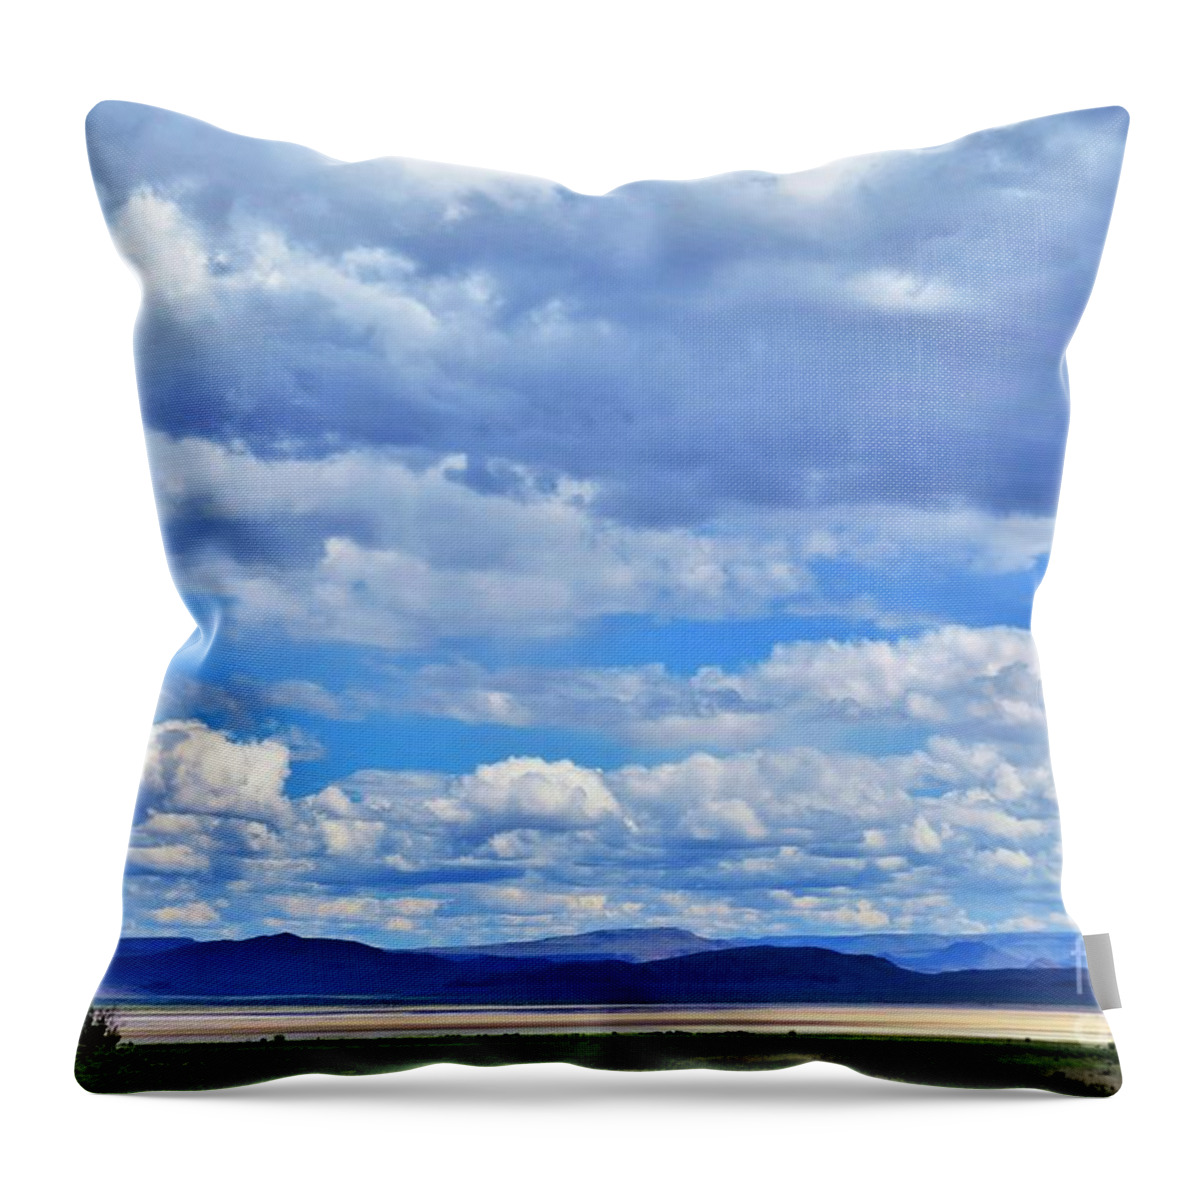 Alvord Desert Throw Pillow featuring the photograph Sky Over Alvord Playa by Michele Penner